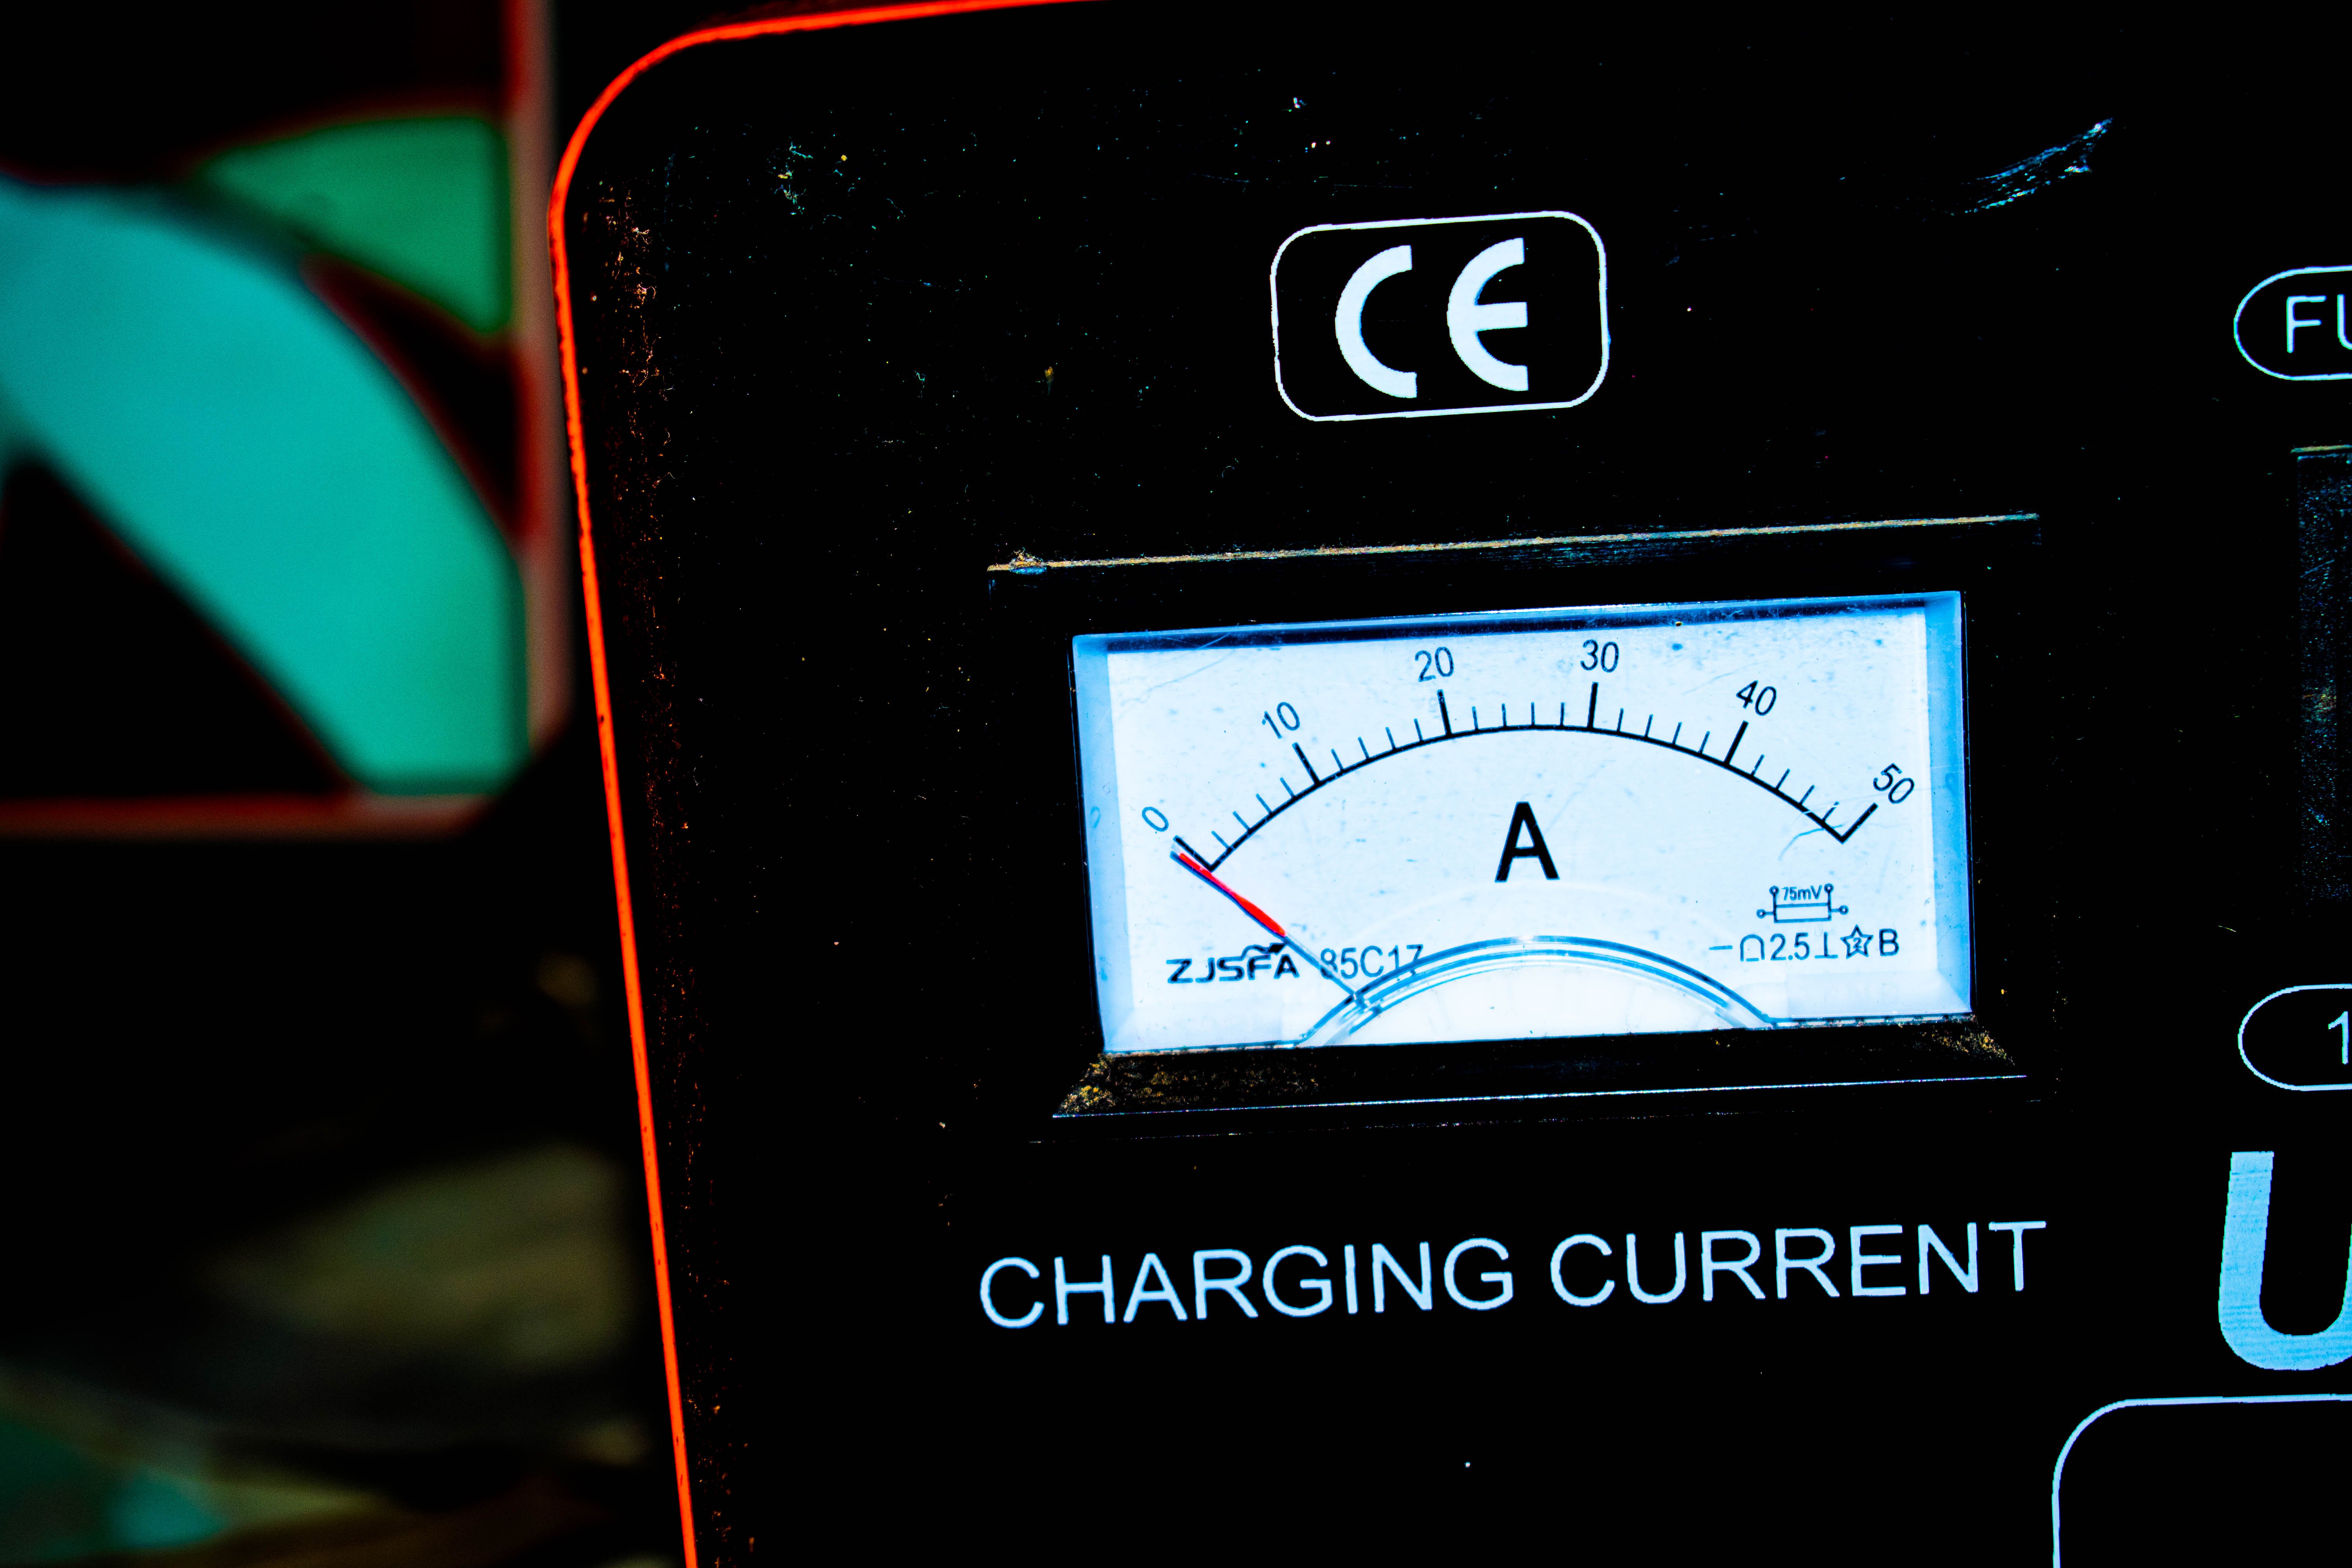 How To Charge A DC Automobile Battery